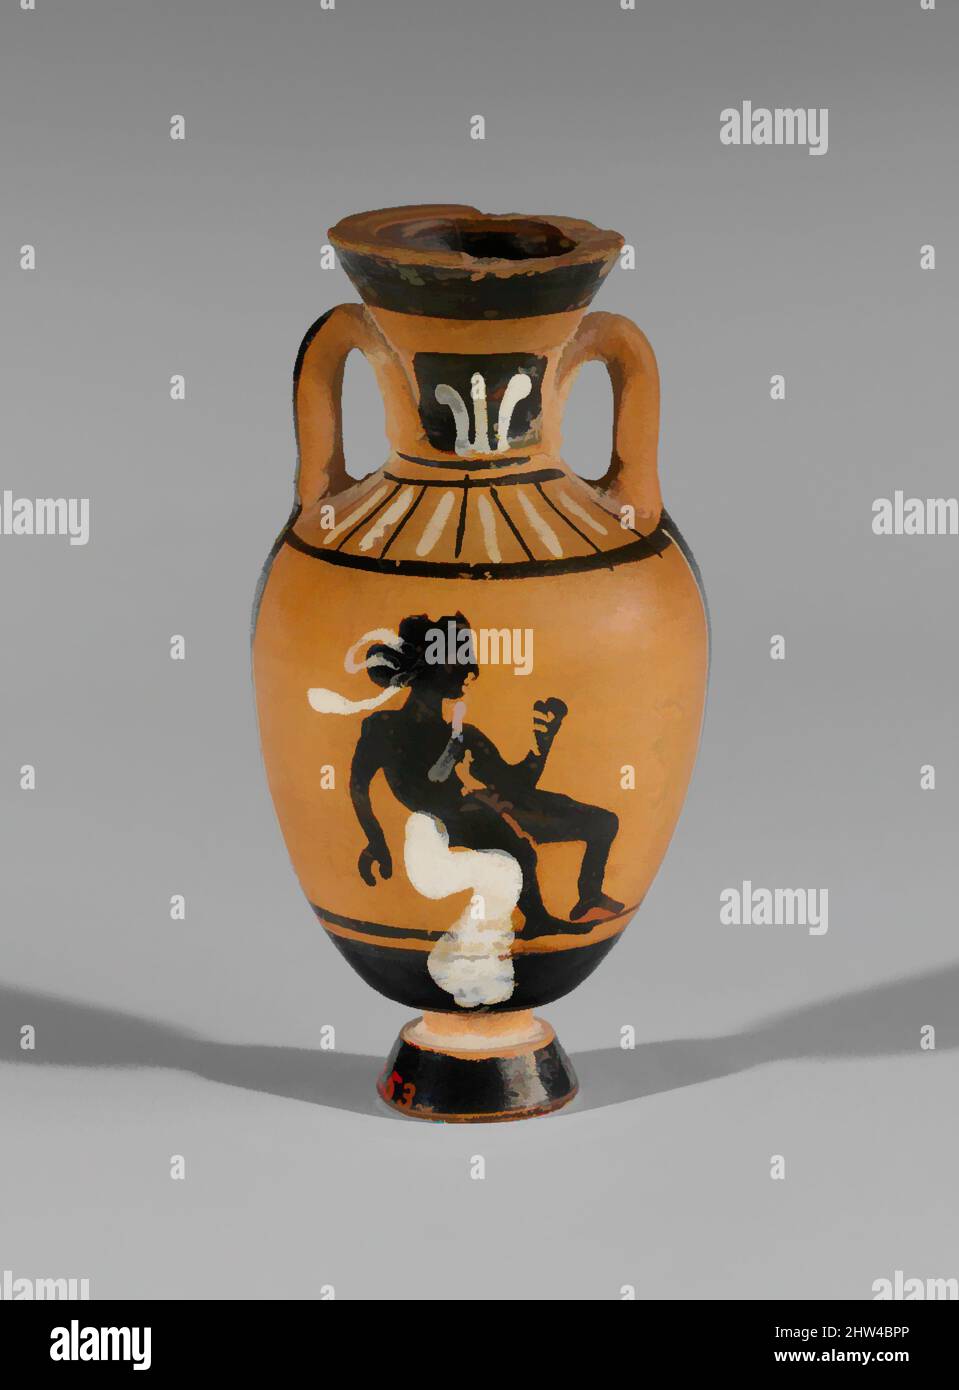 Art inspired by Terracotta miniature Panathenaic amphora, Classical, ca. 400 B.C., Greek, Attic, Terracotta; black-figure, H. 3 1/16 in. (7.8 cm), Vases, Obverse, Athena., Reverse, seated athlete, Classic works modernized by Artotop with a splash of modernity. Shapes, color and value, eye-catching visual impact on art. Emotions through freedom of artworks in a contemporary way. A timeless message pursuing a wildly creative new direction. Artists turning to the digital medium and creating the Artotop NFT Stock Photo